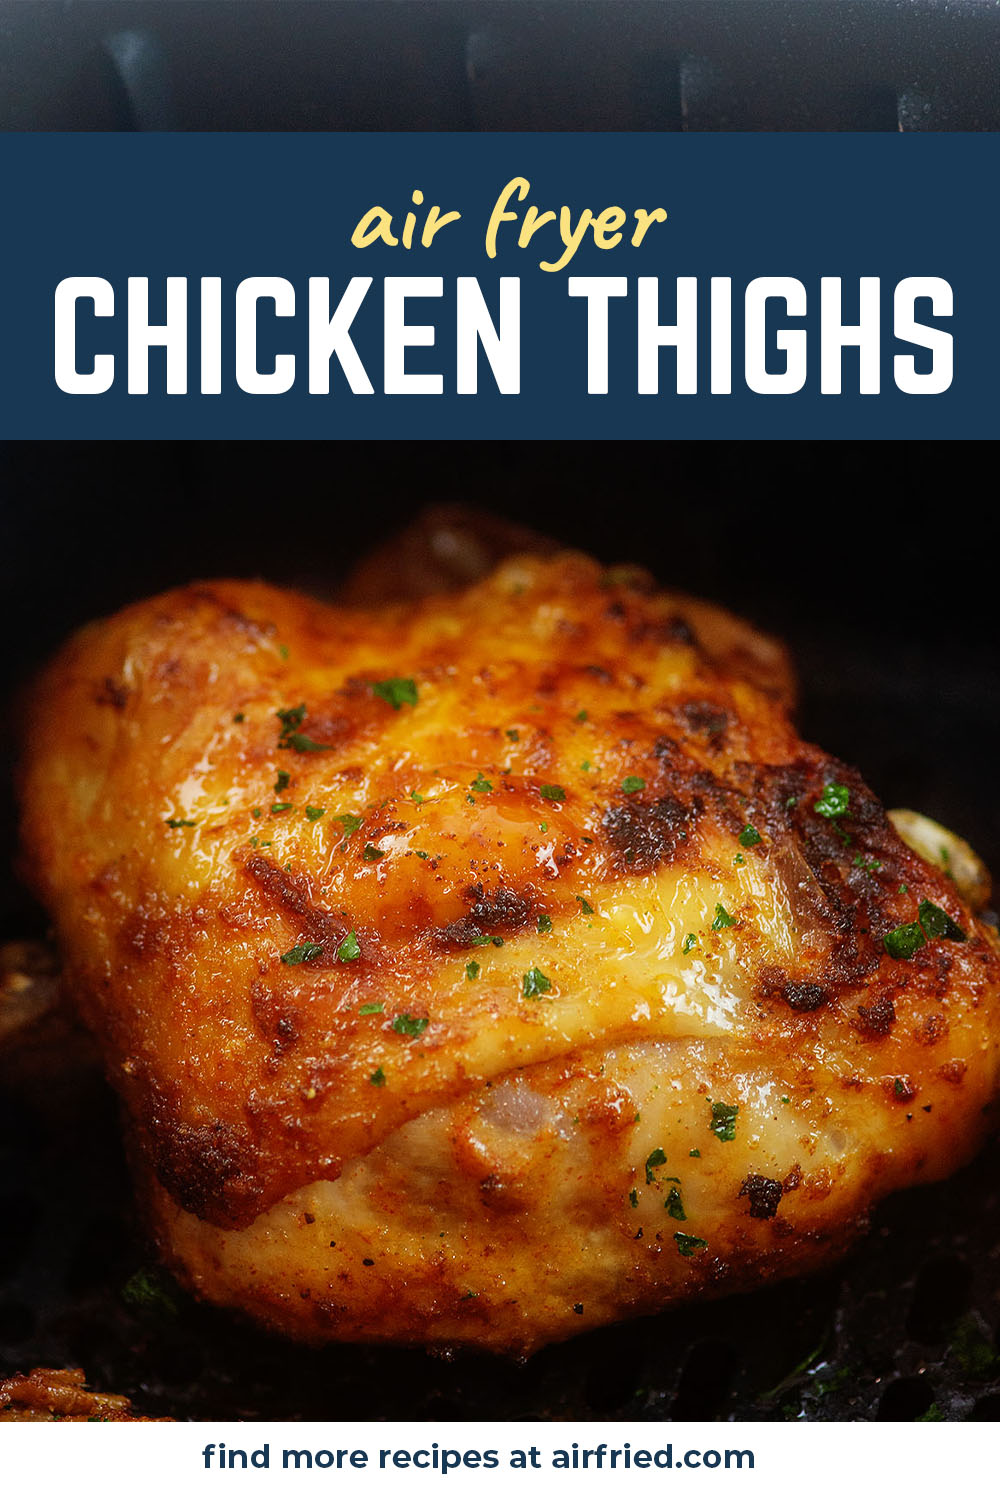 These air fried chicken thighs are so tender and juicy you will love them!